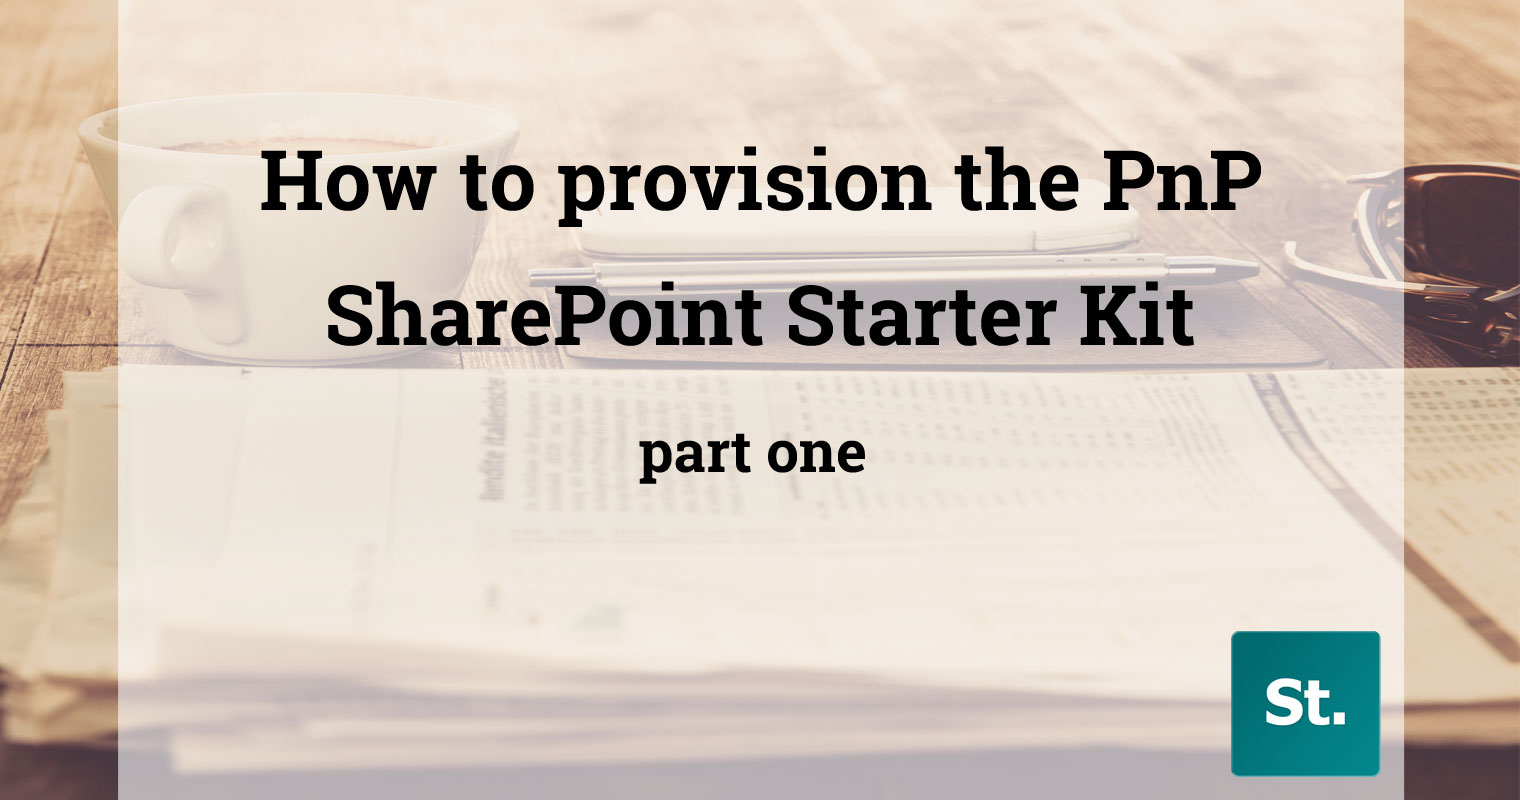 How to provision and deploy the PnP SharePoint Starter Kit part one